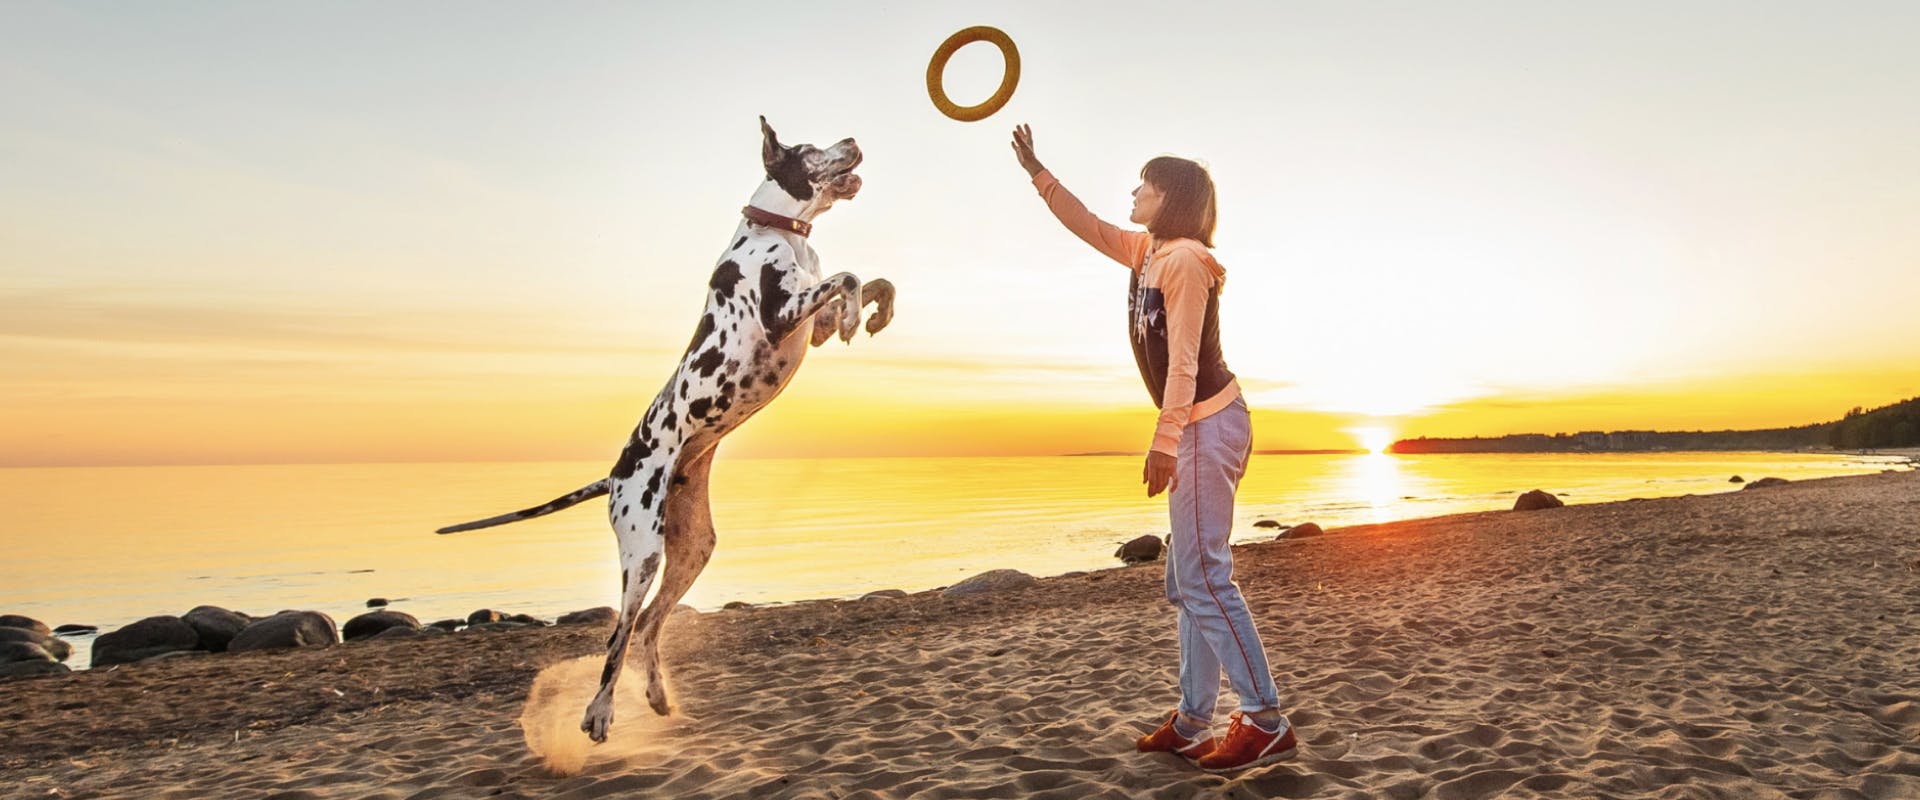 A woman and a dog playing with a frisbee on a beach at sunset